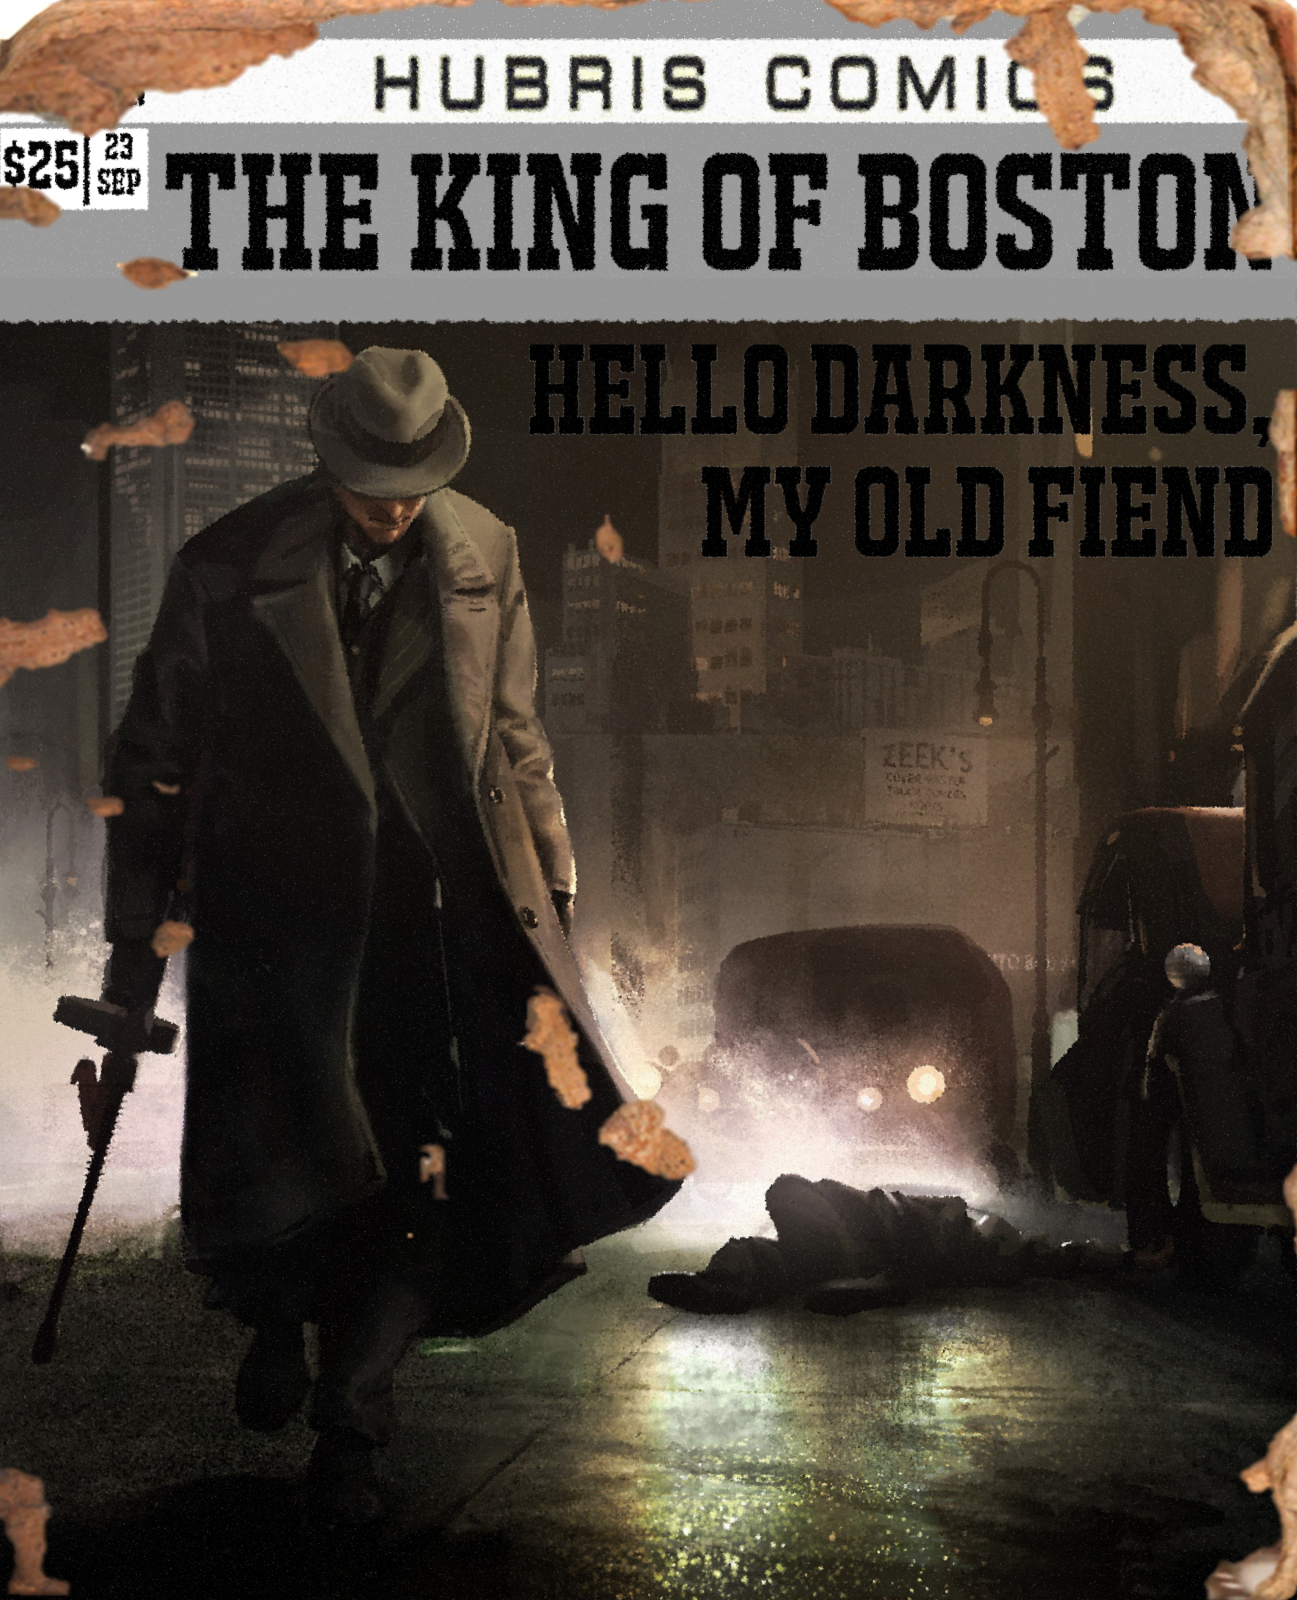 The King of Boston: Hello Darkness, My Old Friend